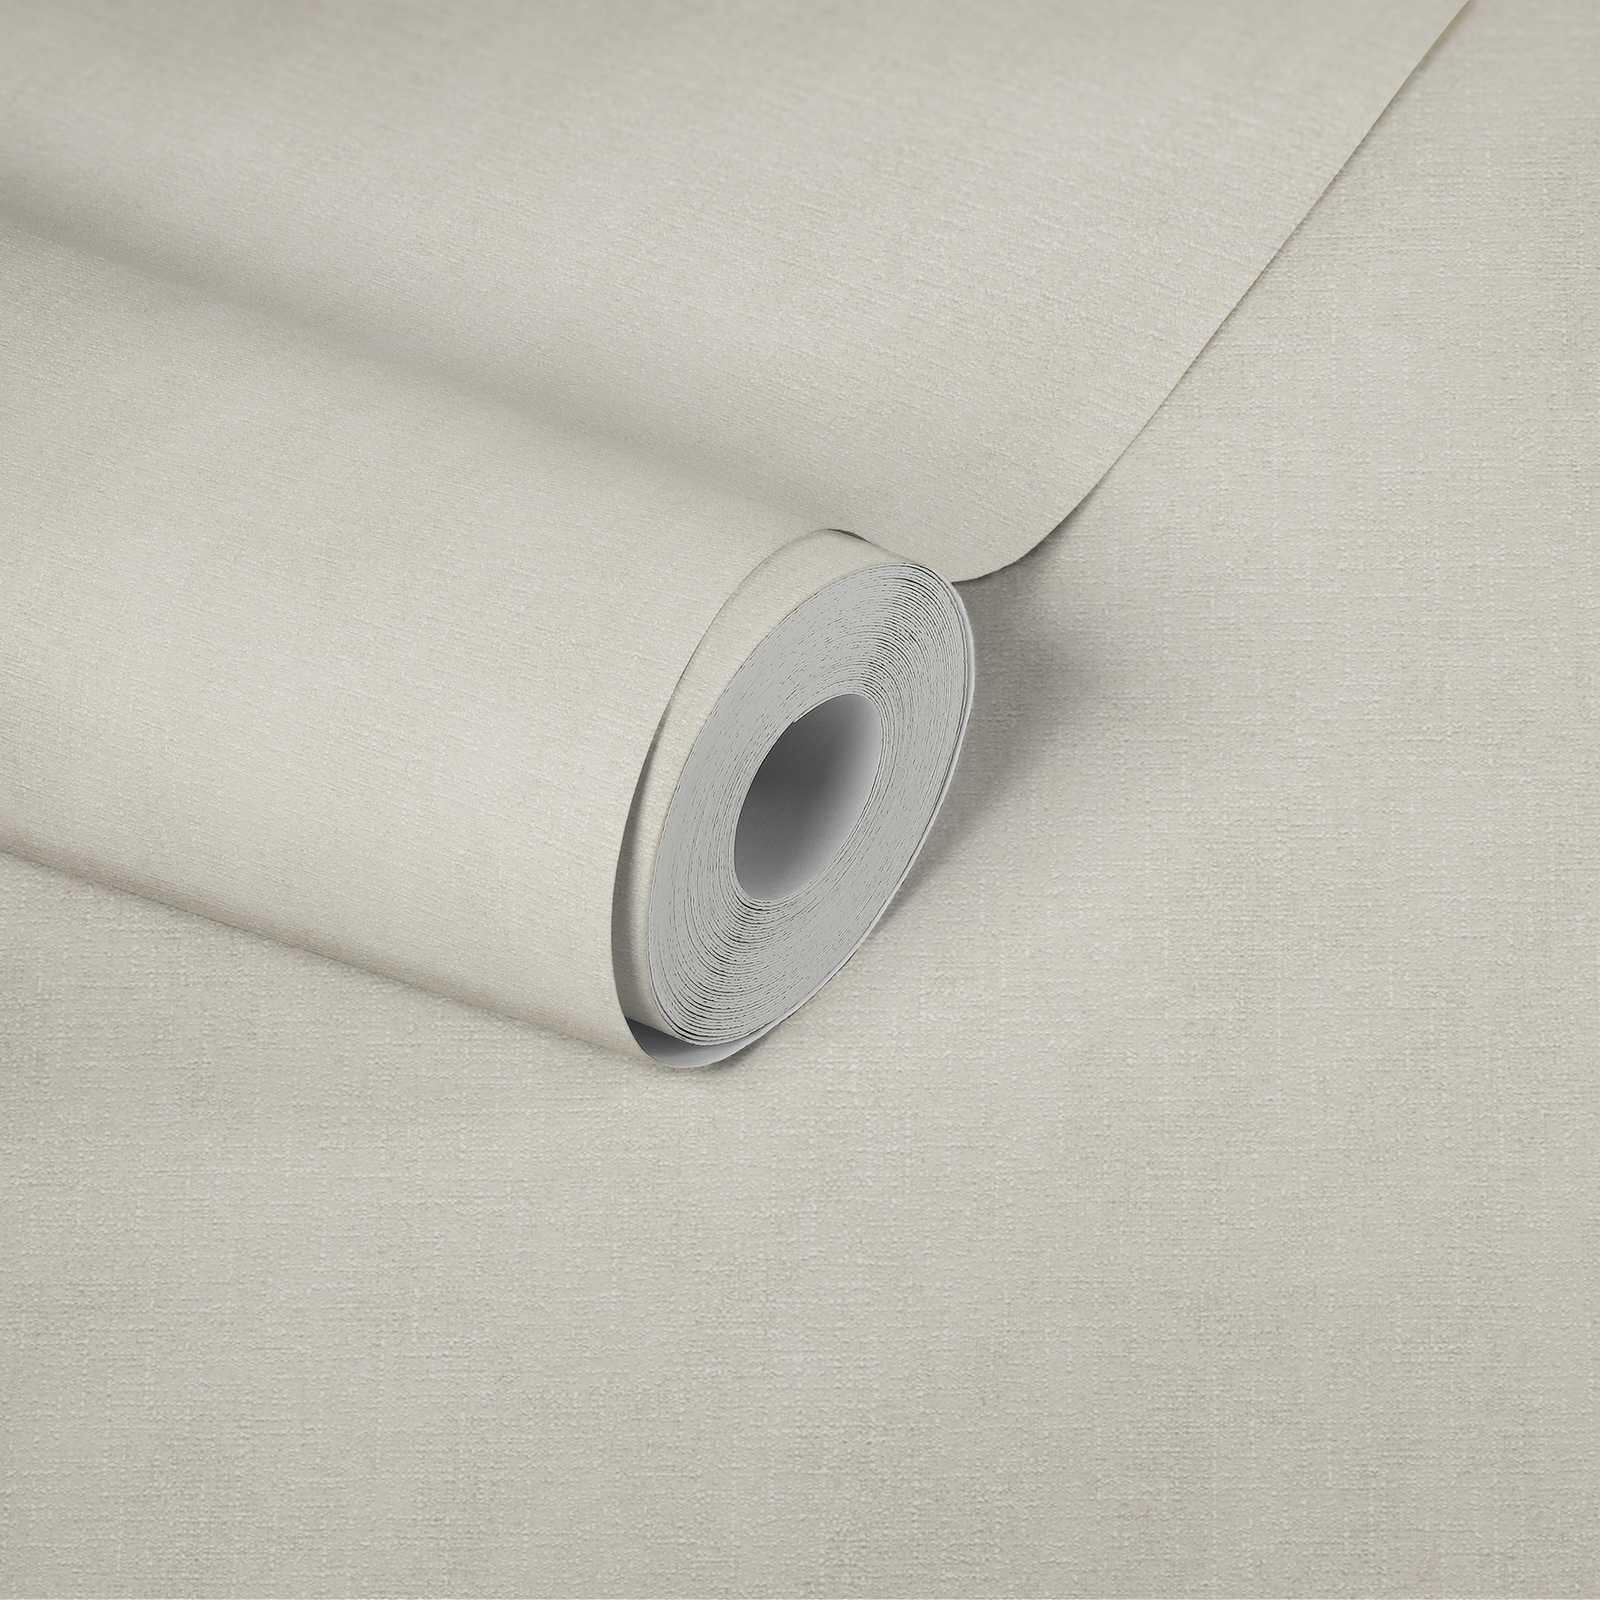             Cream white textile look wallpaper with gloss finish - white
        